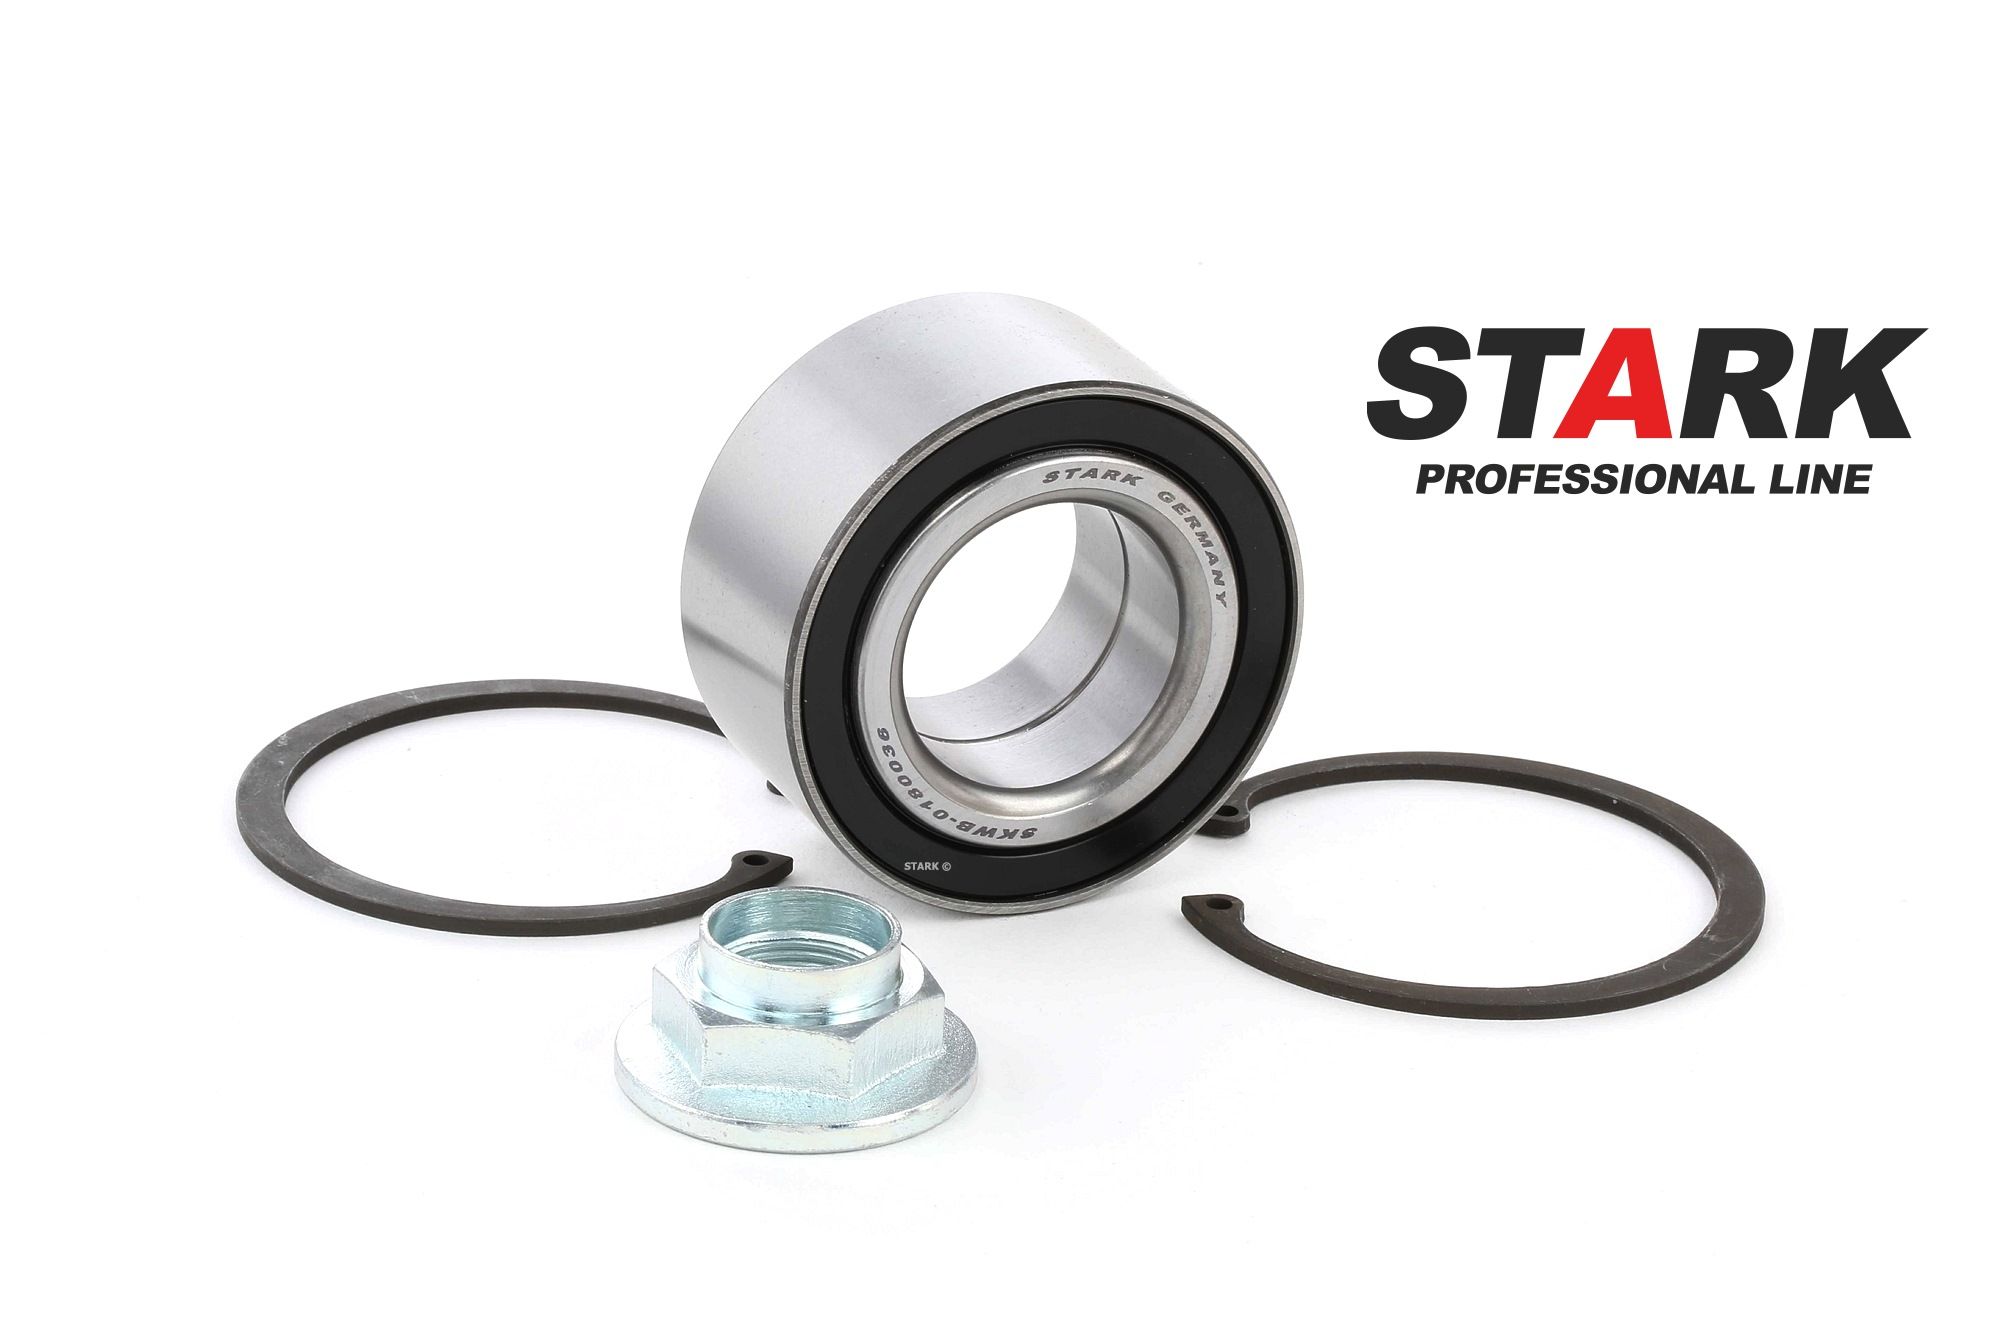 STARK SKWB-0180036 Wheel bearing kit Rear Axle both sides, Front axle both sides, 75 mm